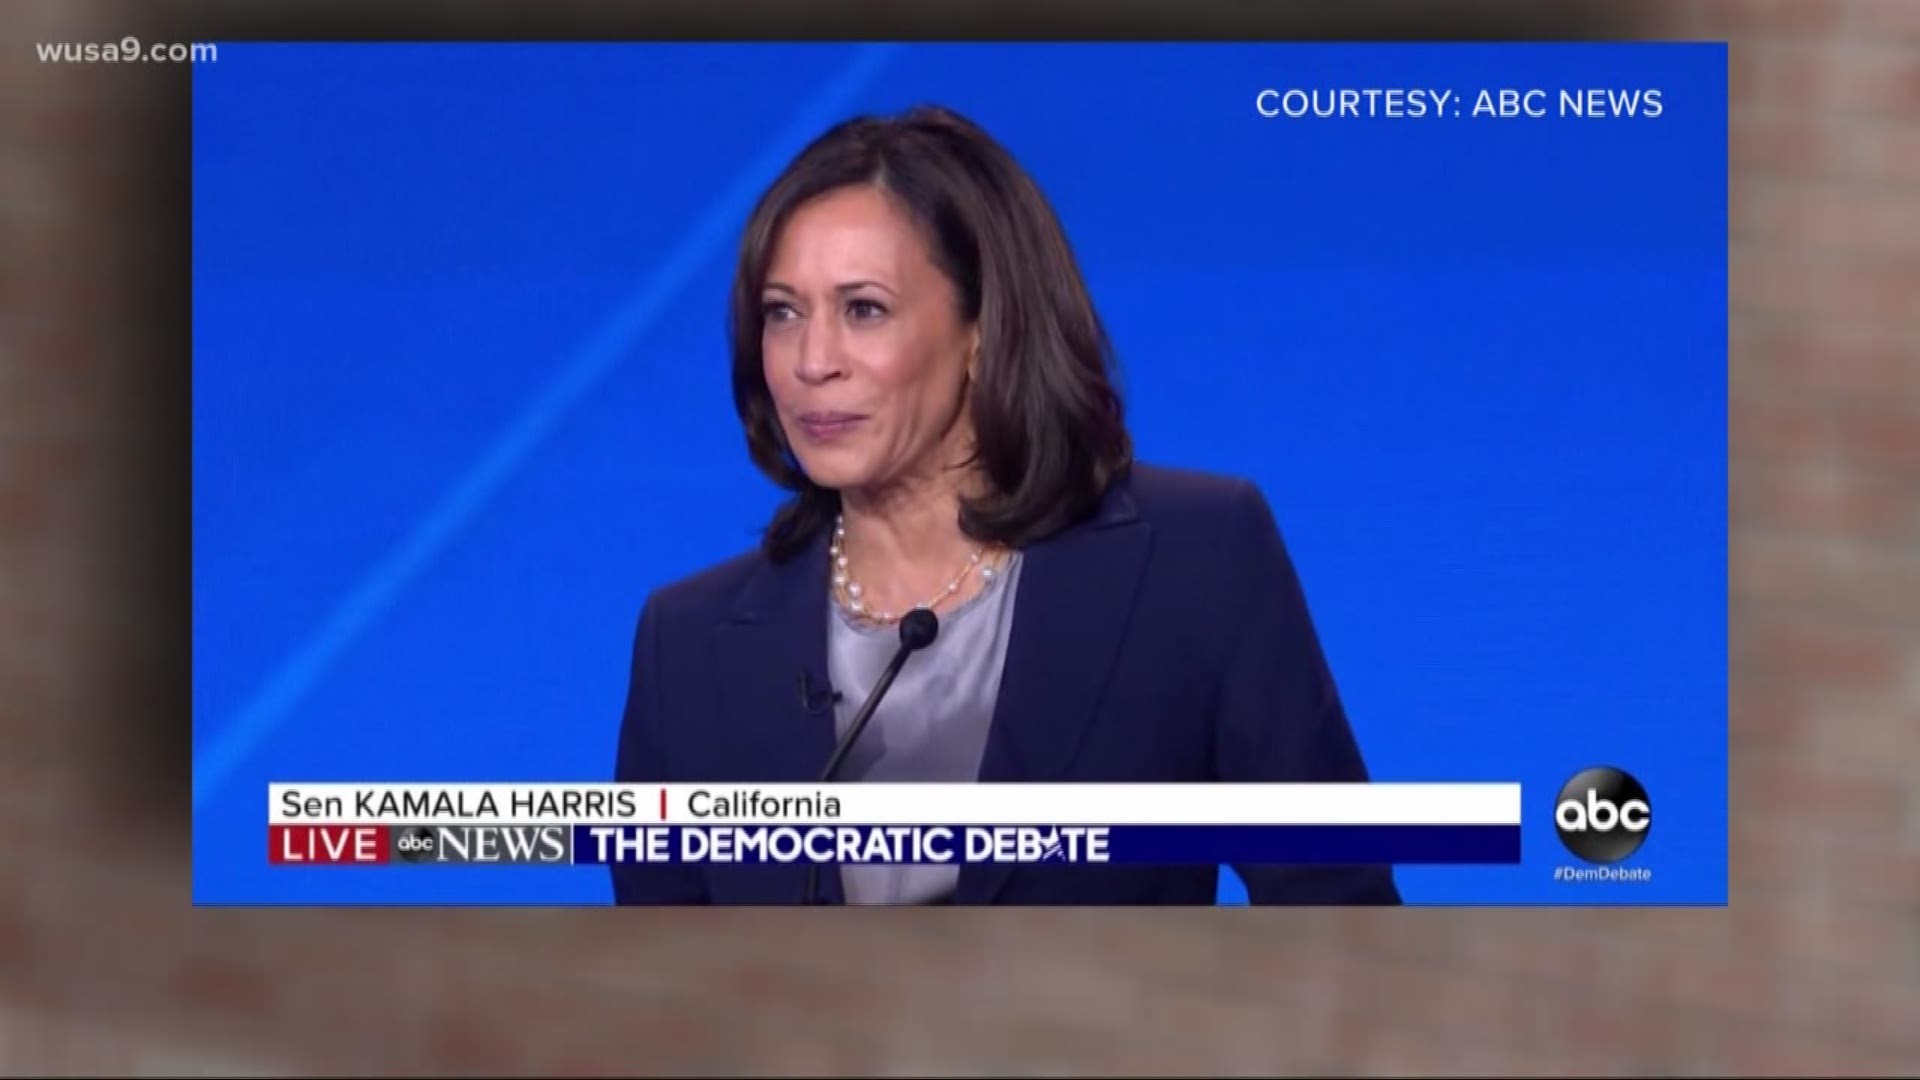 The Democrats running for president went to Texas for the third debate leading to the 2020 race for the White House. Personal brand consultant, Dr. Talaya Waller rates their performances.